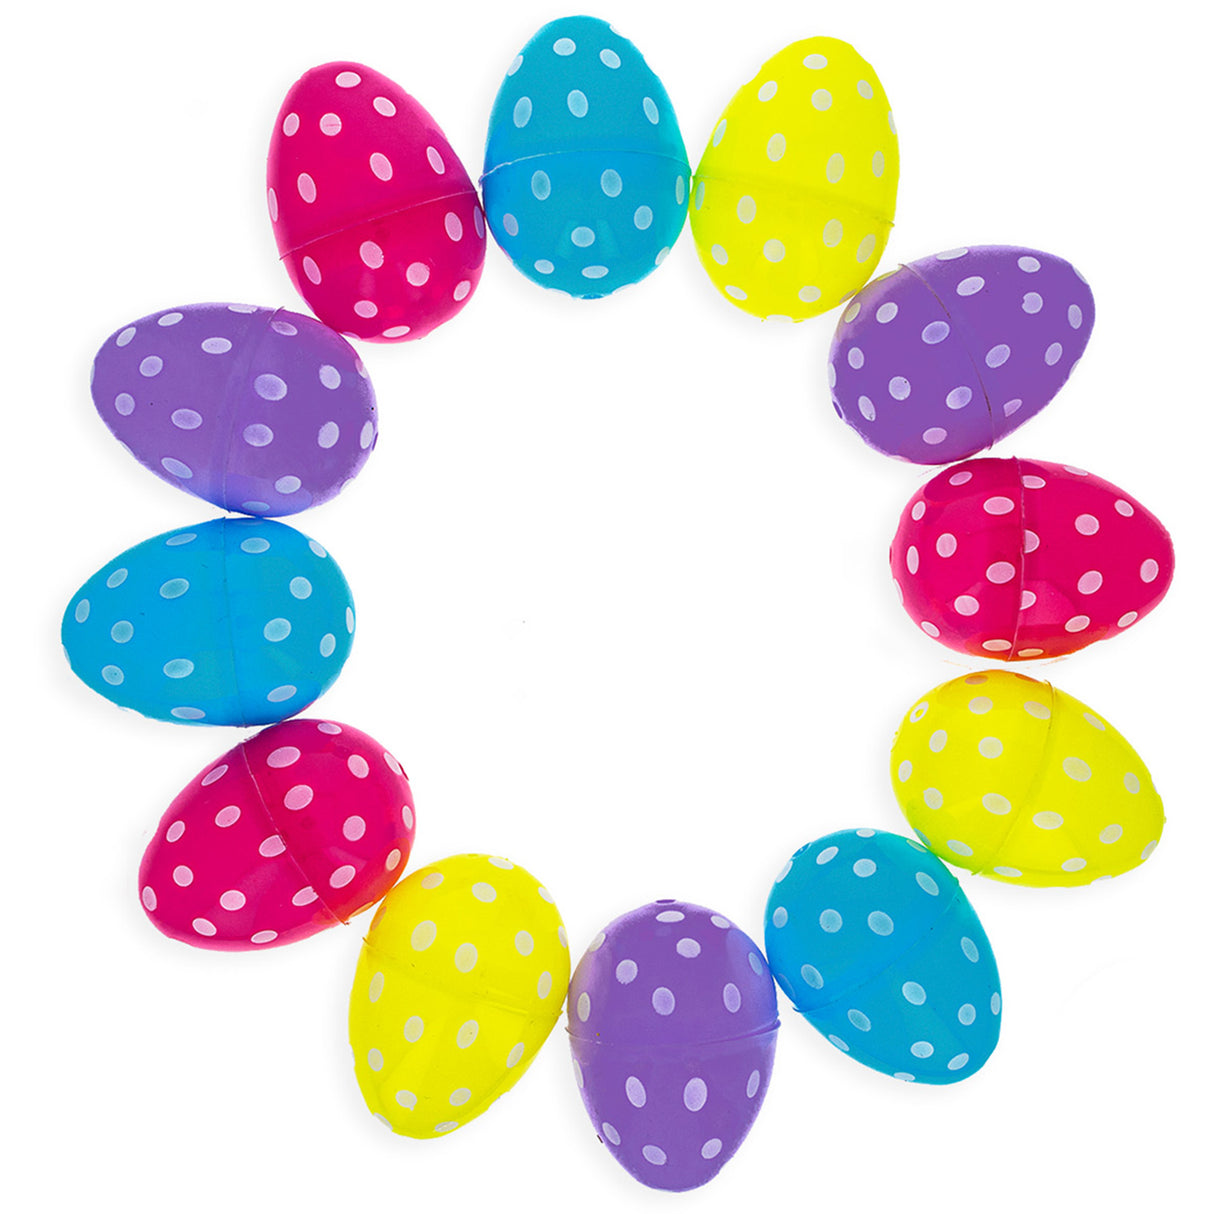 12 Bright Pattern Plastic Easter Eggs in Multi color, Oval shape